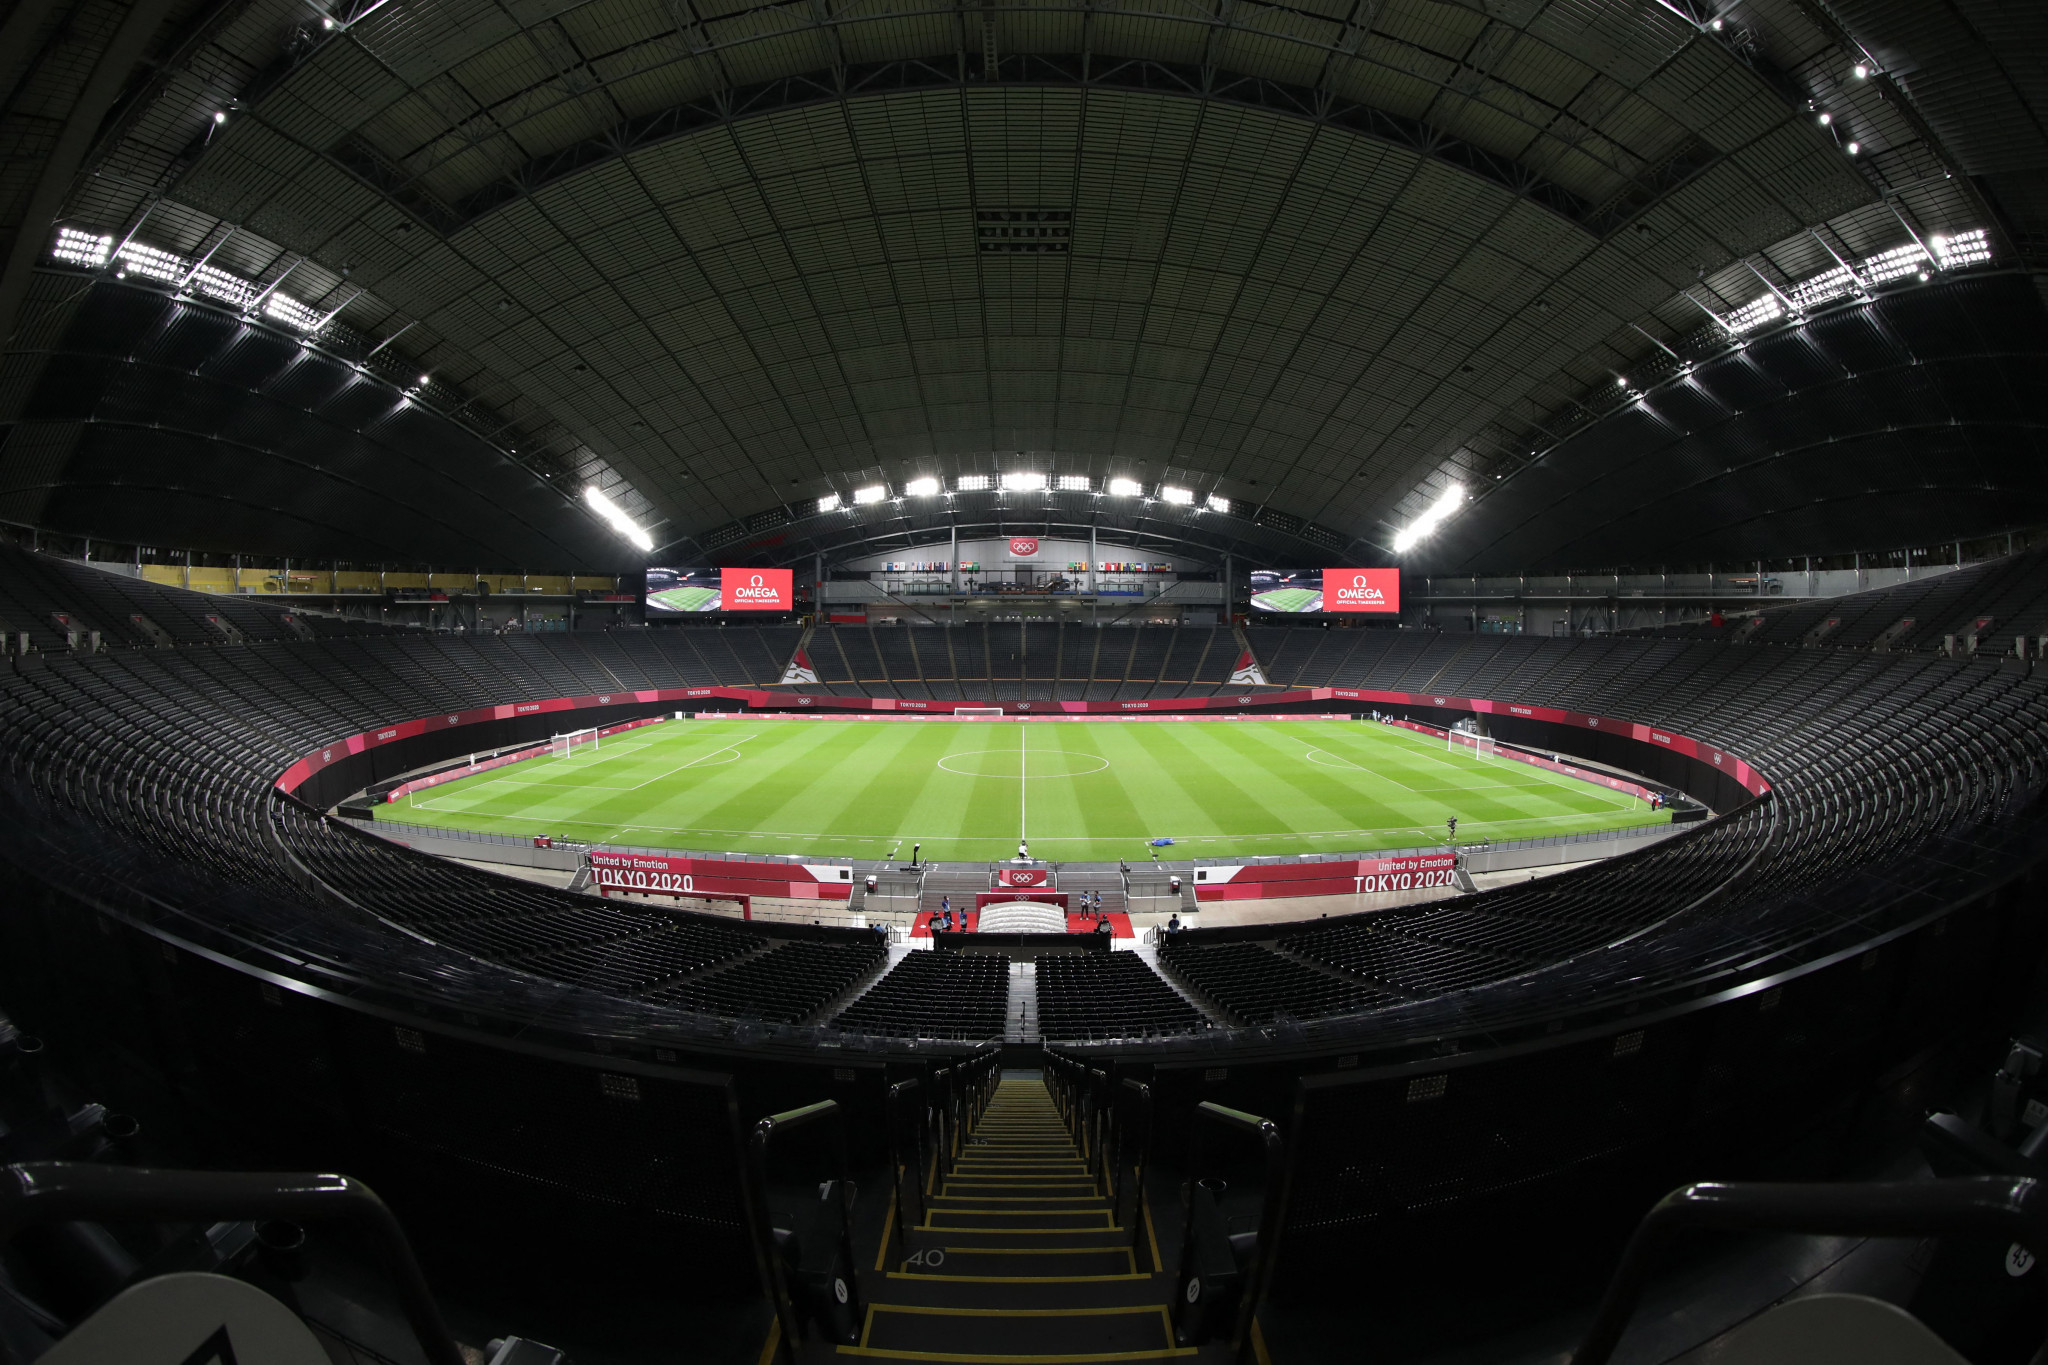 Tokyo 2020 football venue the Sapporo Dome has been proposed as the host for the Opening and Closing Ceremonies of the 2030 Winter Olympics ©Getty Images